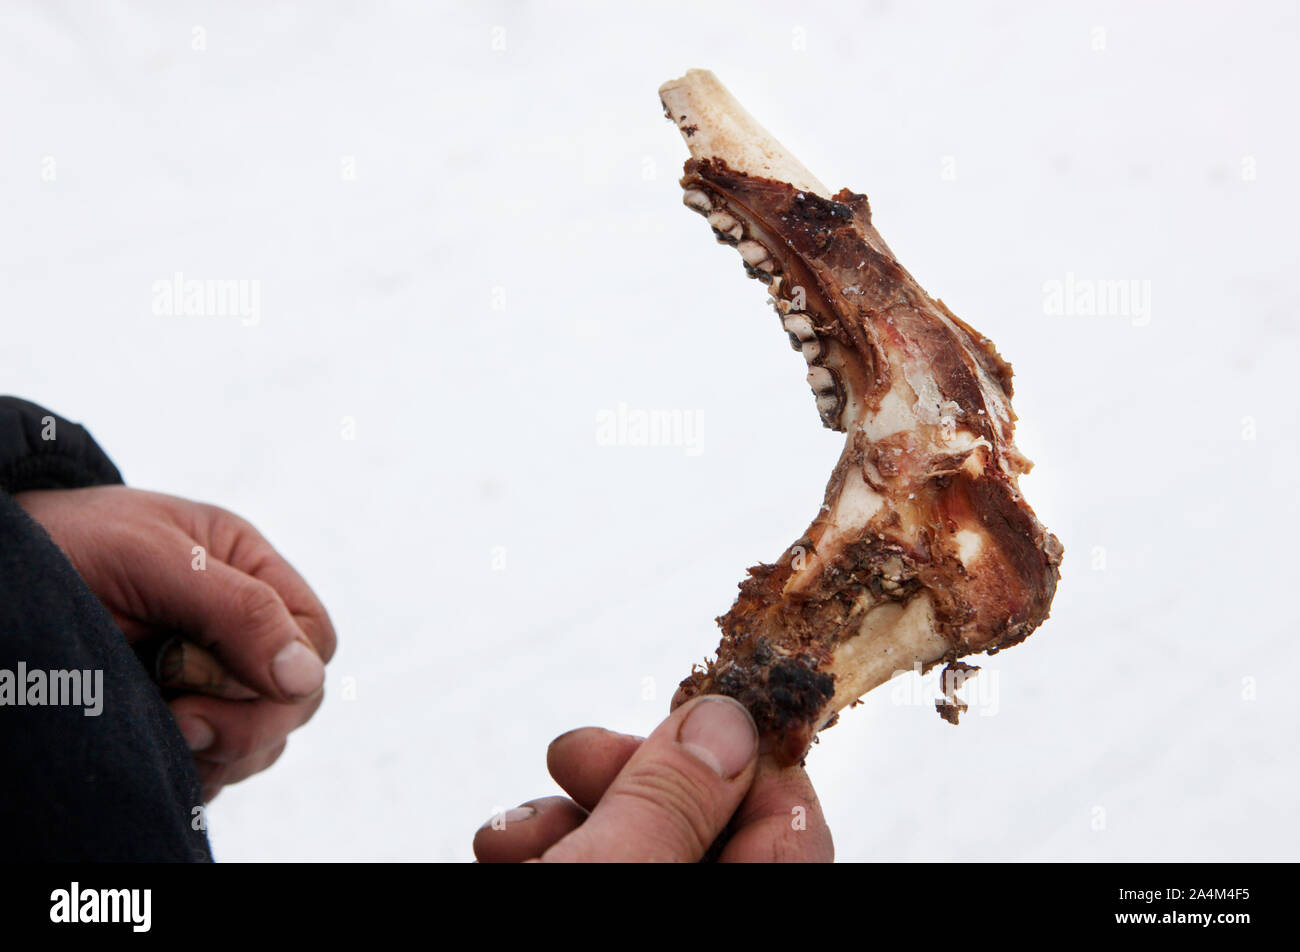 Jaws of reindeer. Considered a delicacy by Laplanders. Stock Photo